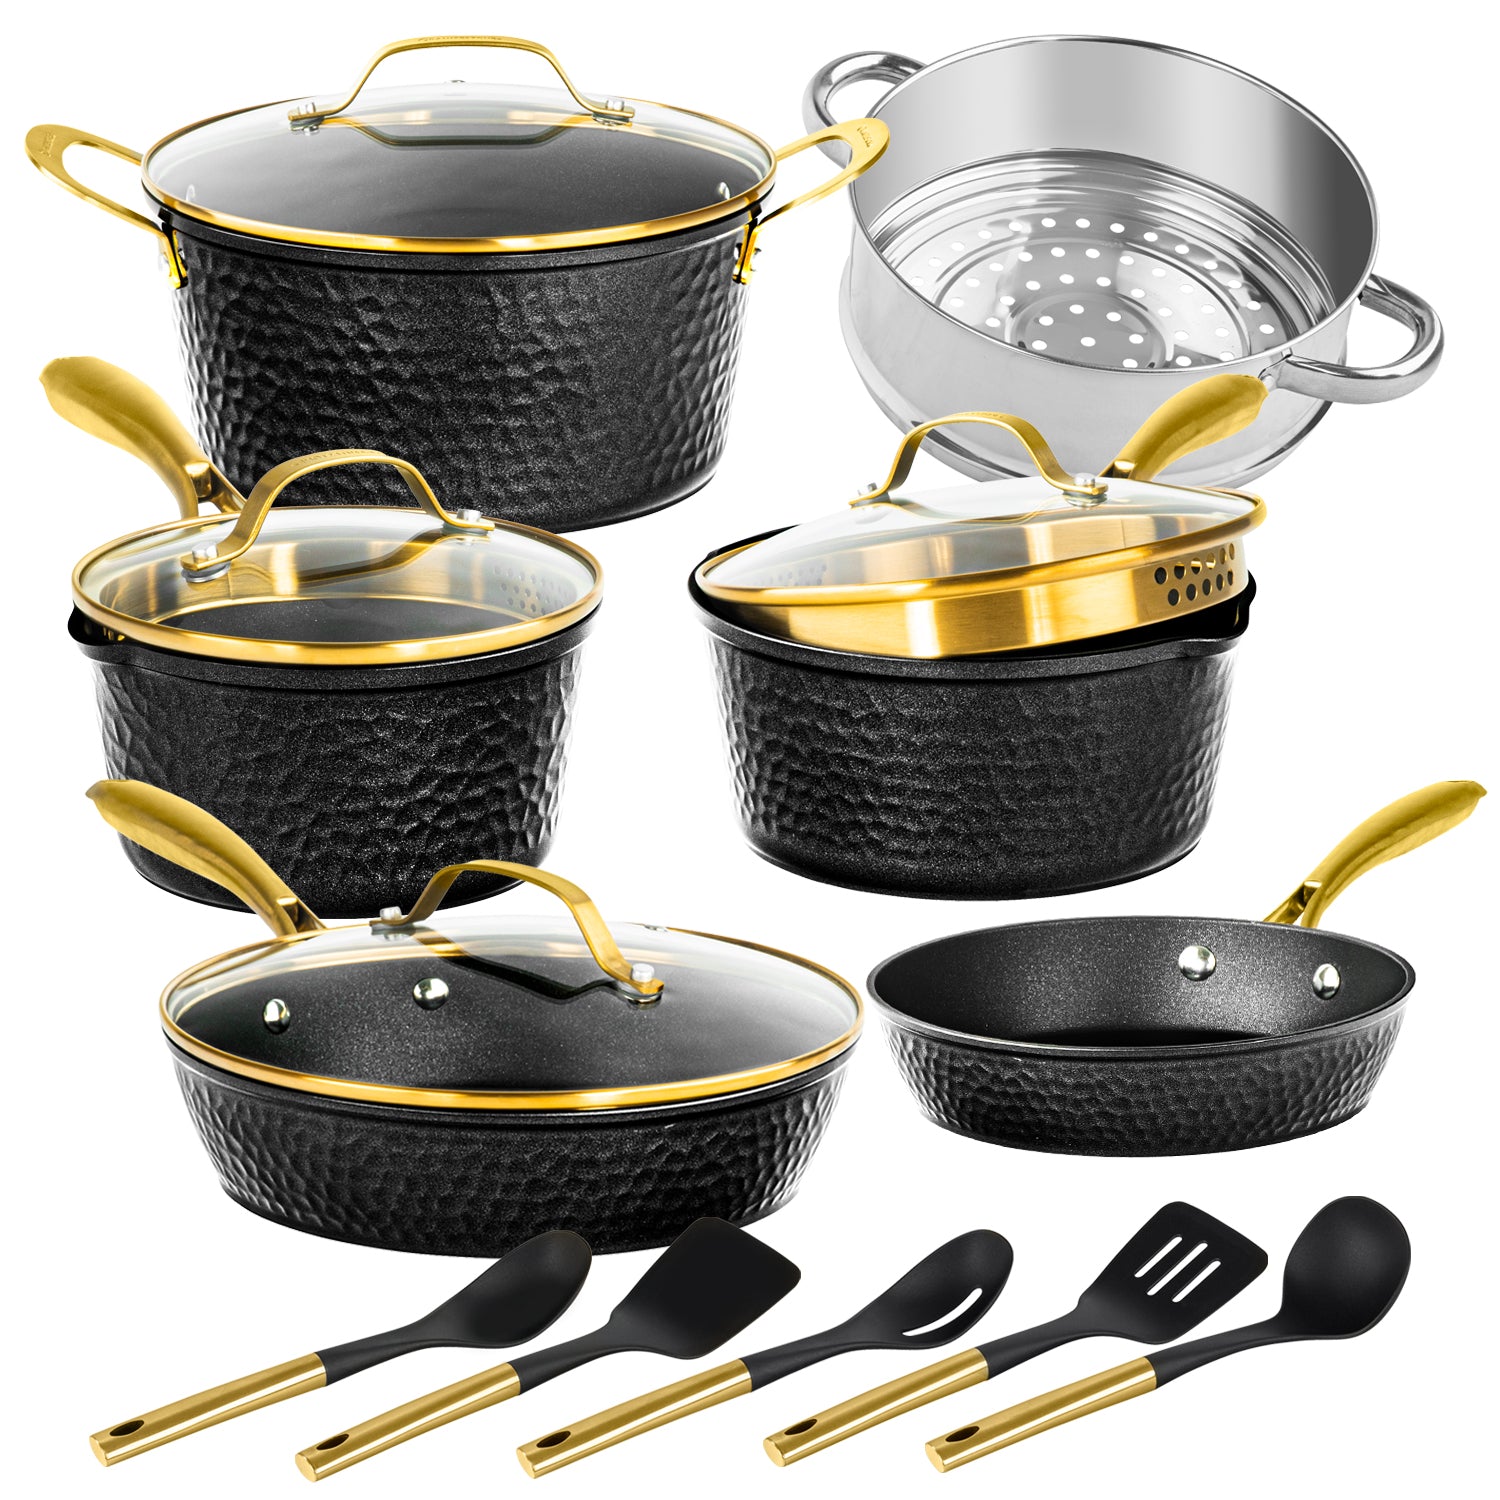 Thyme & Table 5qt Saute Nonstick Ceramic, Black and Gold Speckled